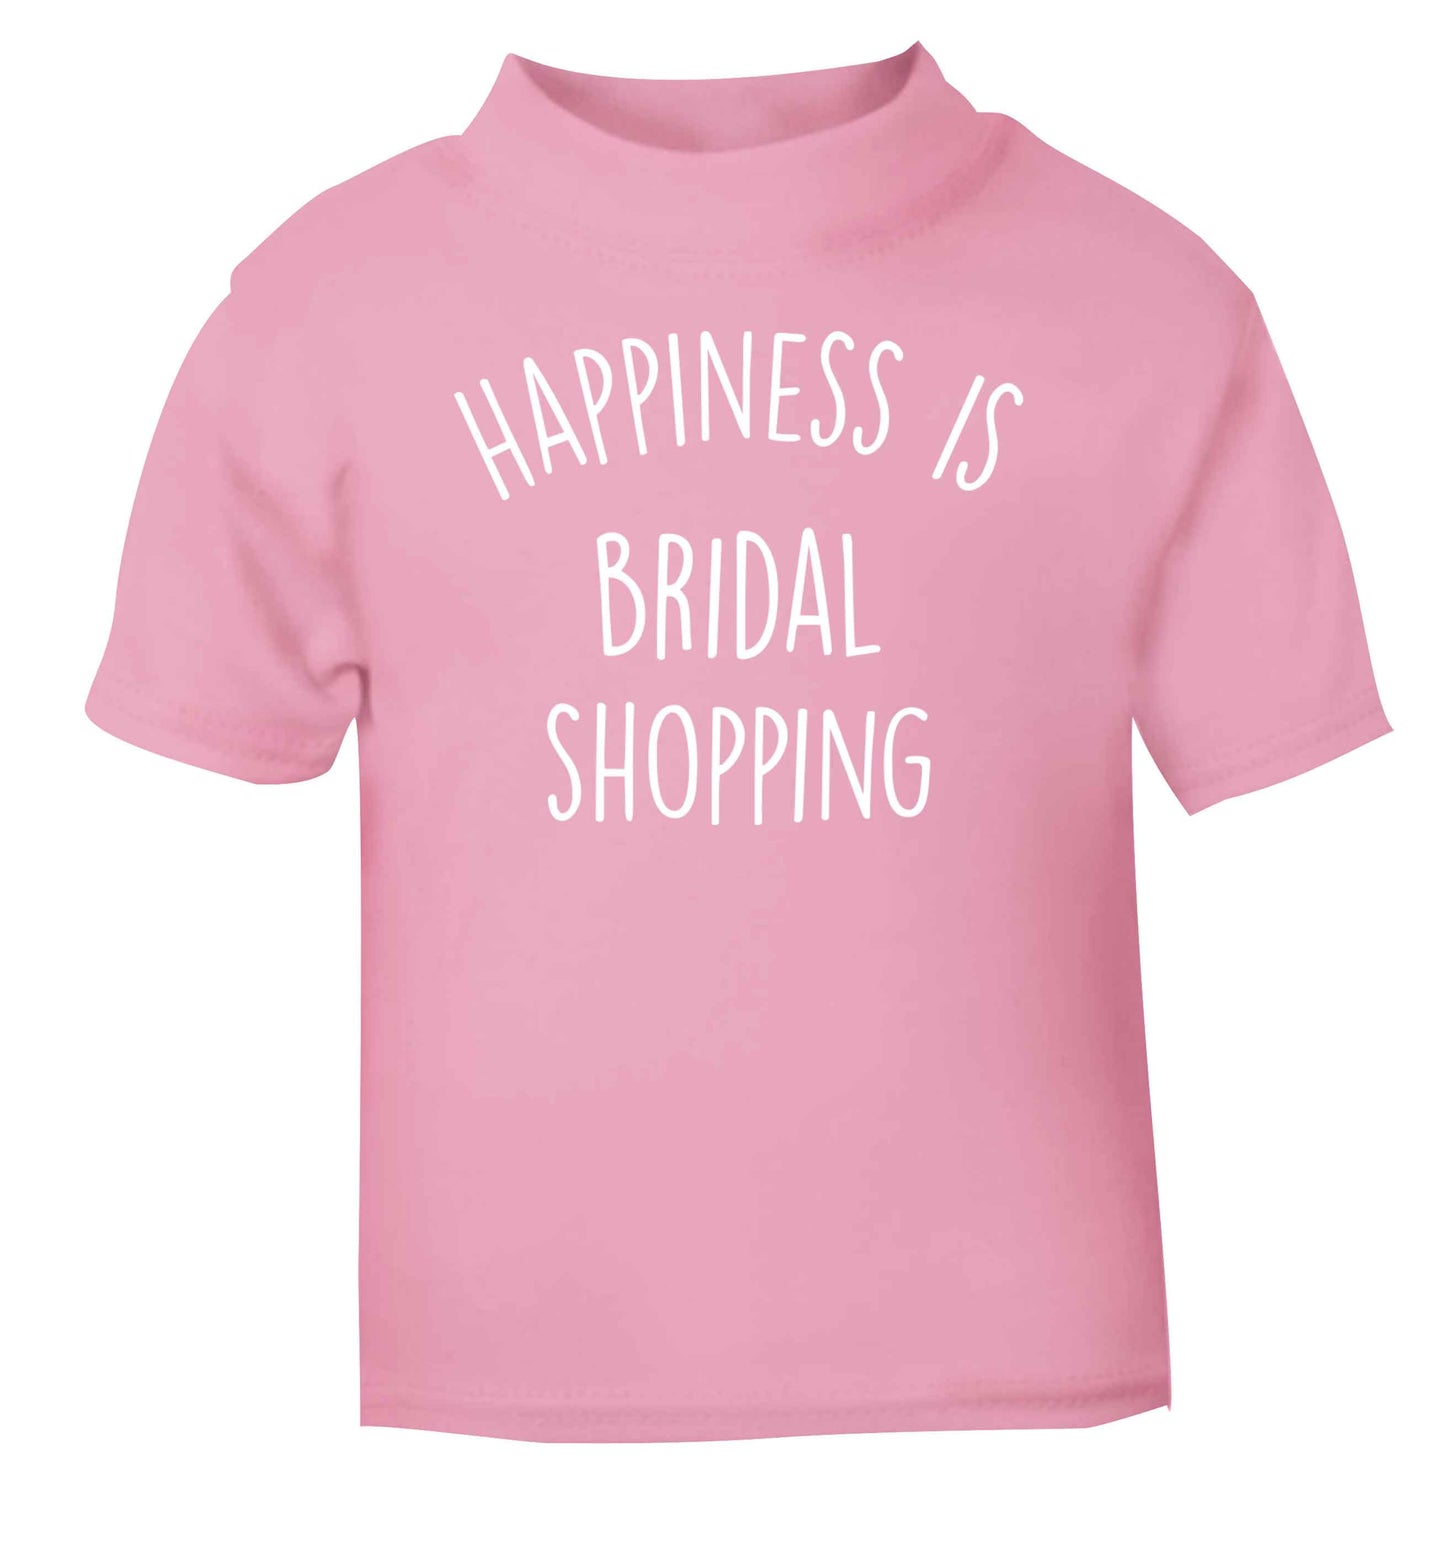 Happiness is bridal shopping light pink baby toddler Tshirt 2 Years